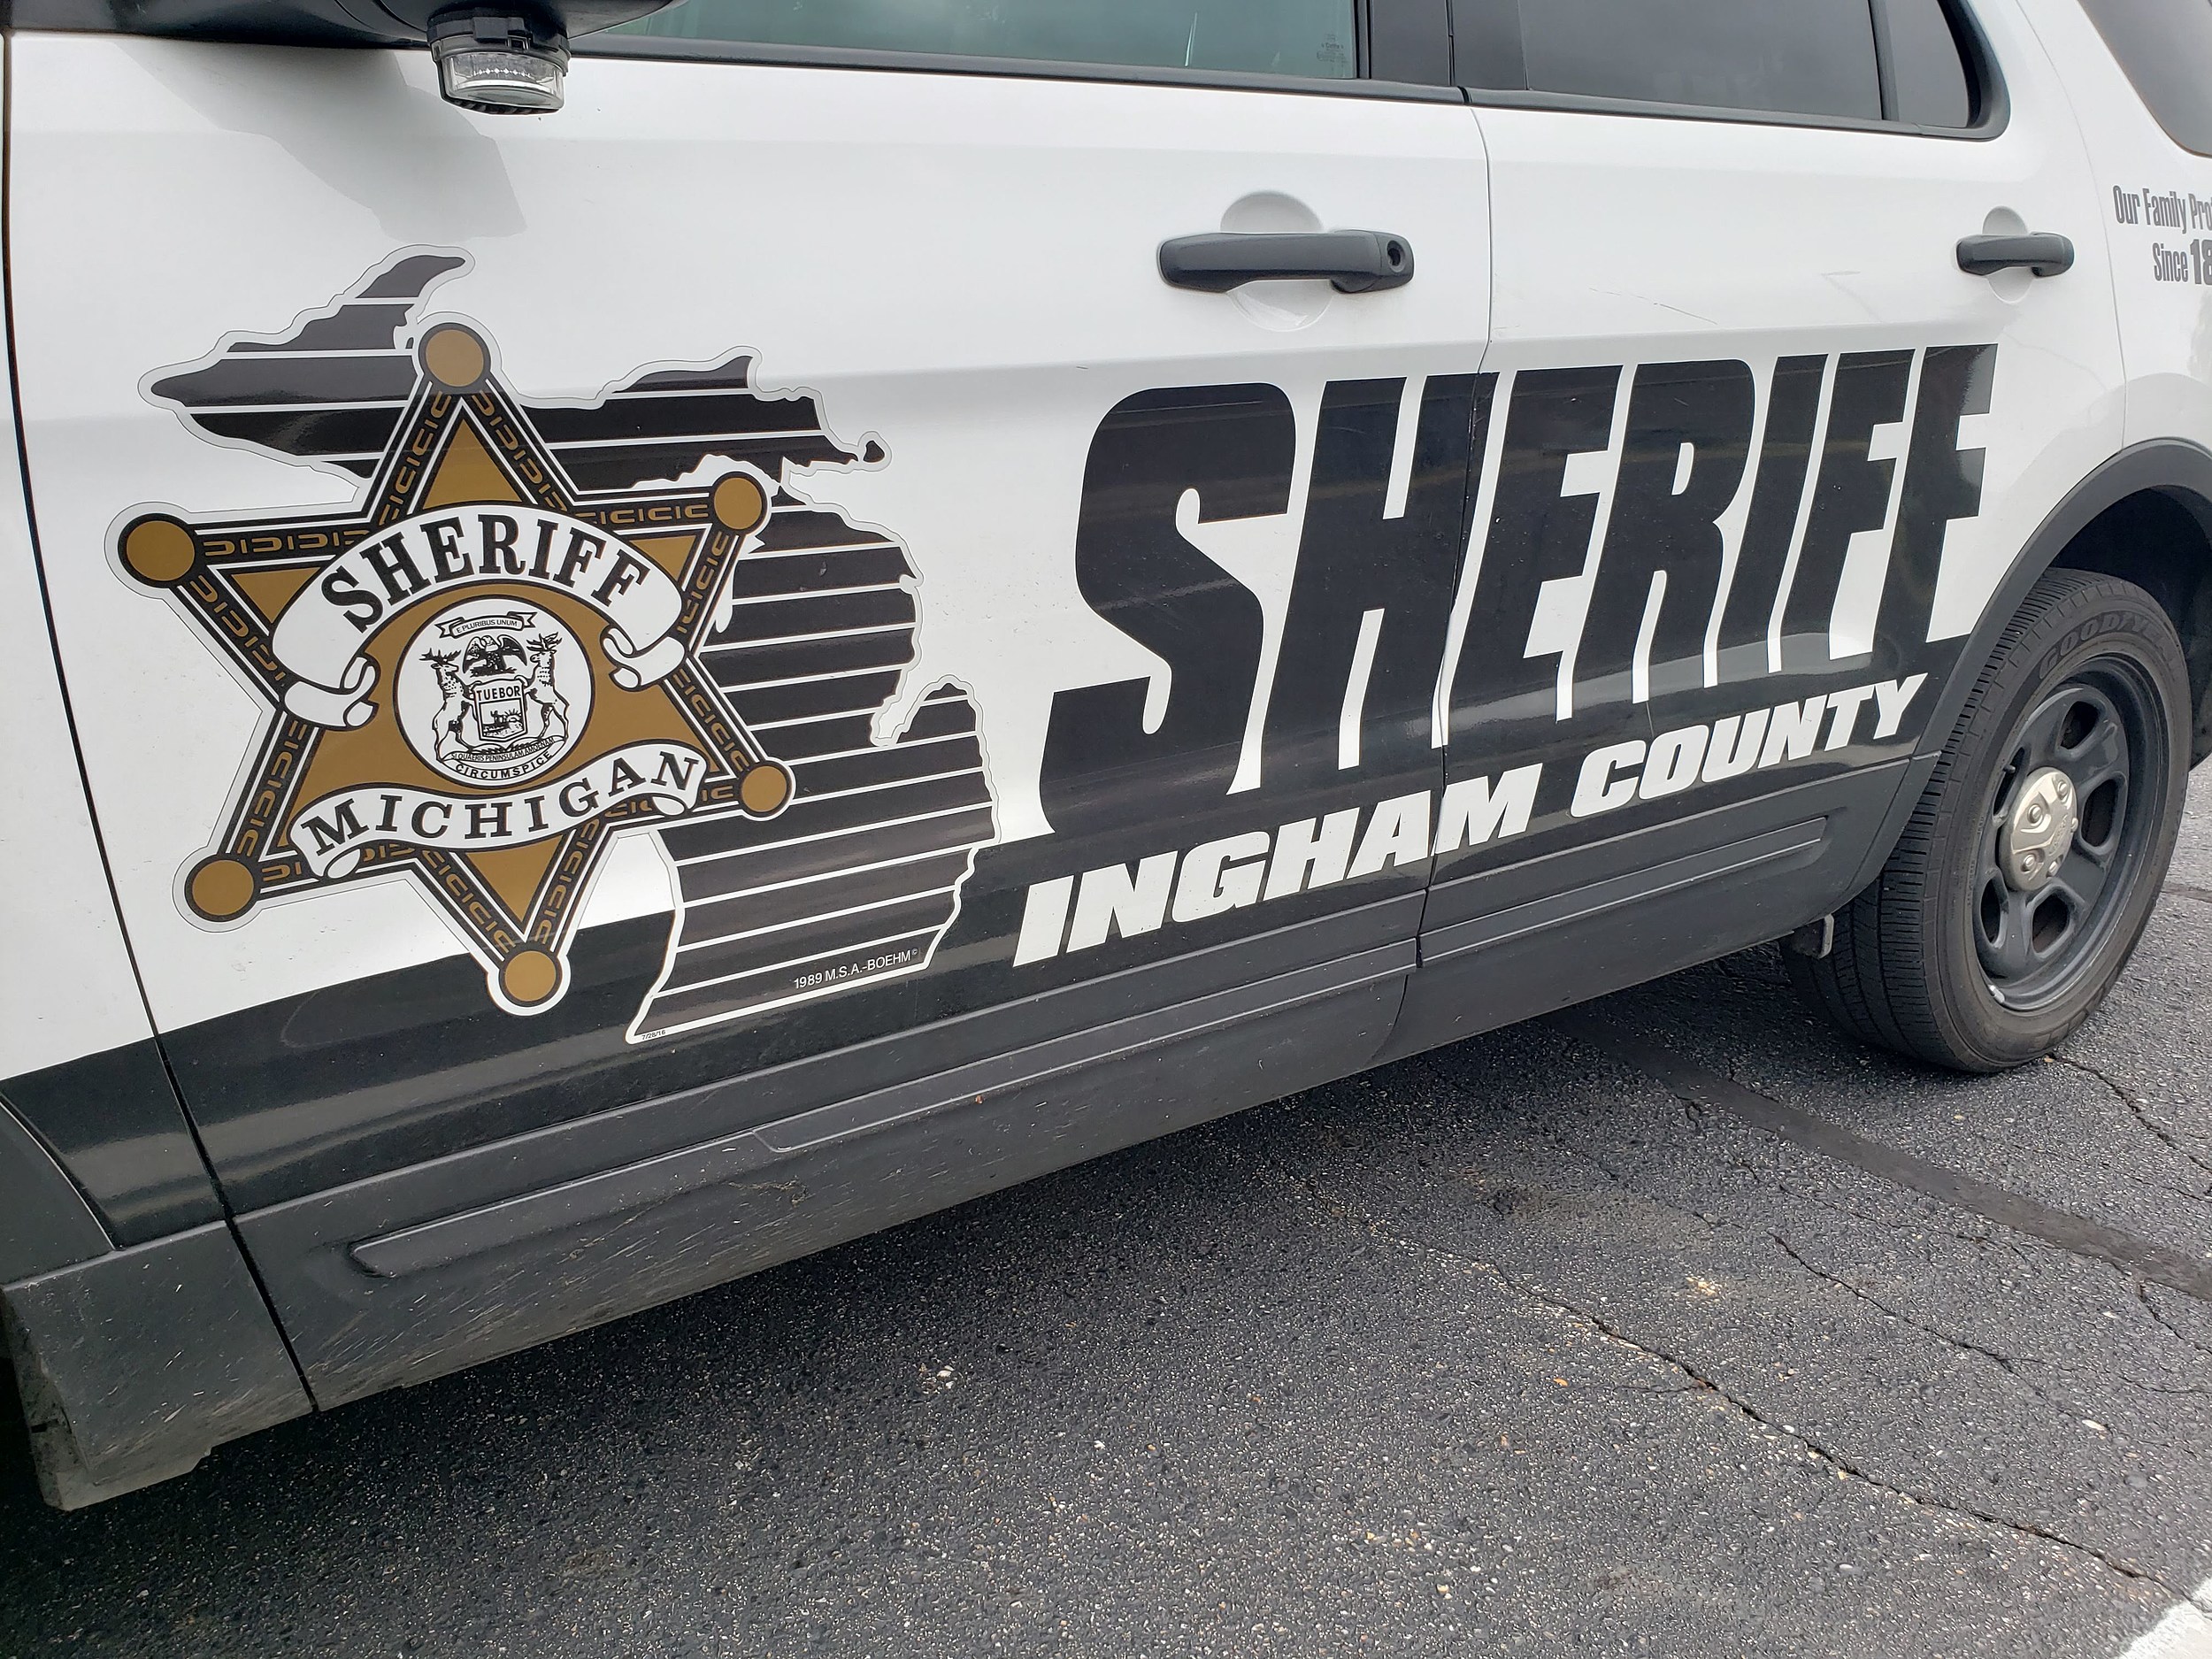 Ingham County Sheriff’s Department 100.7 WITL